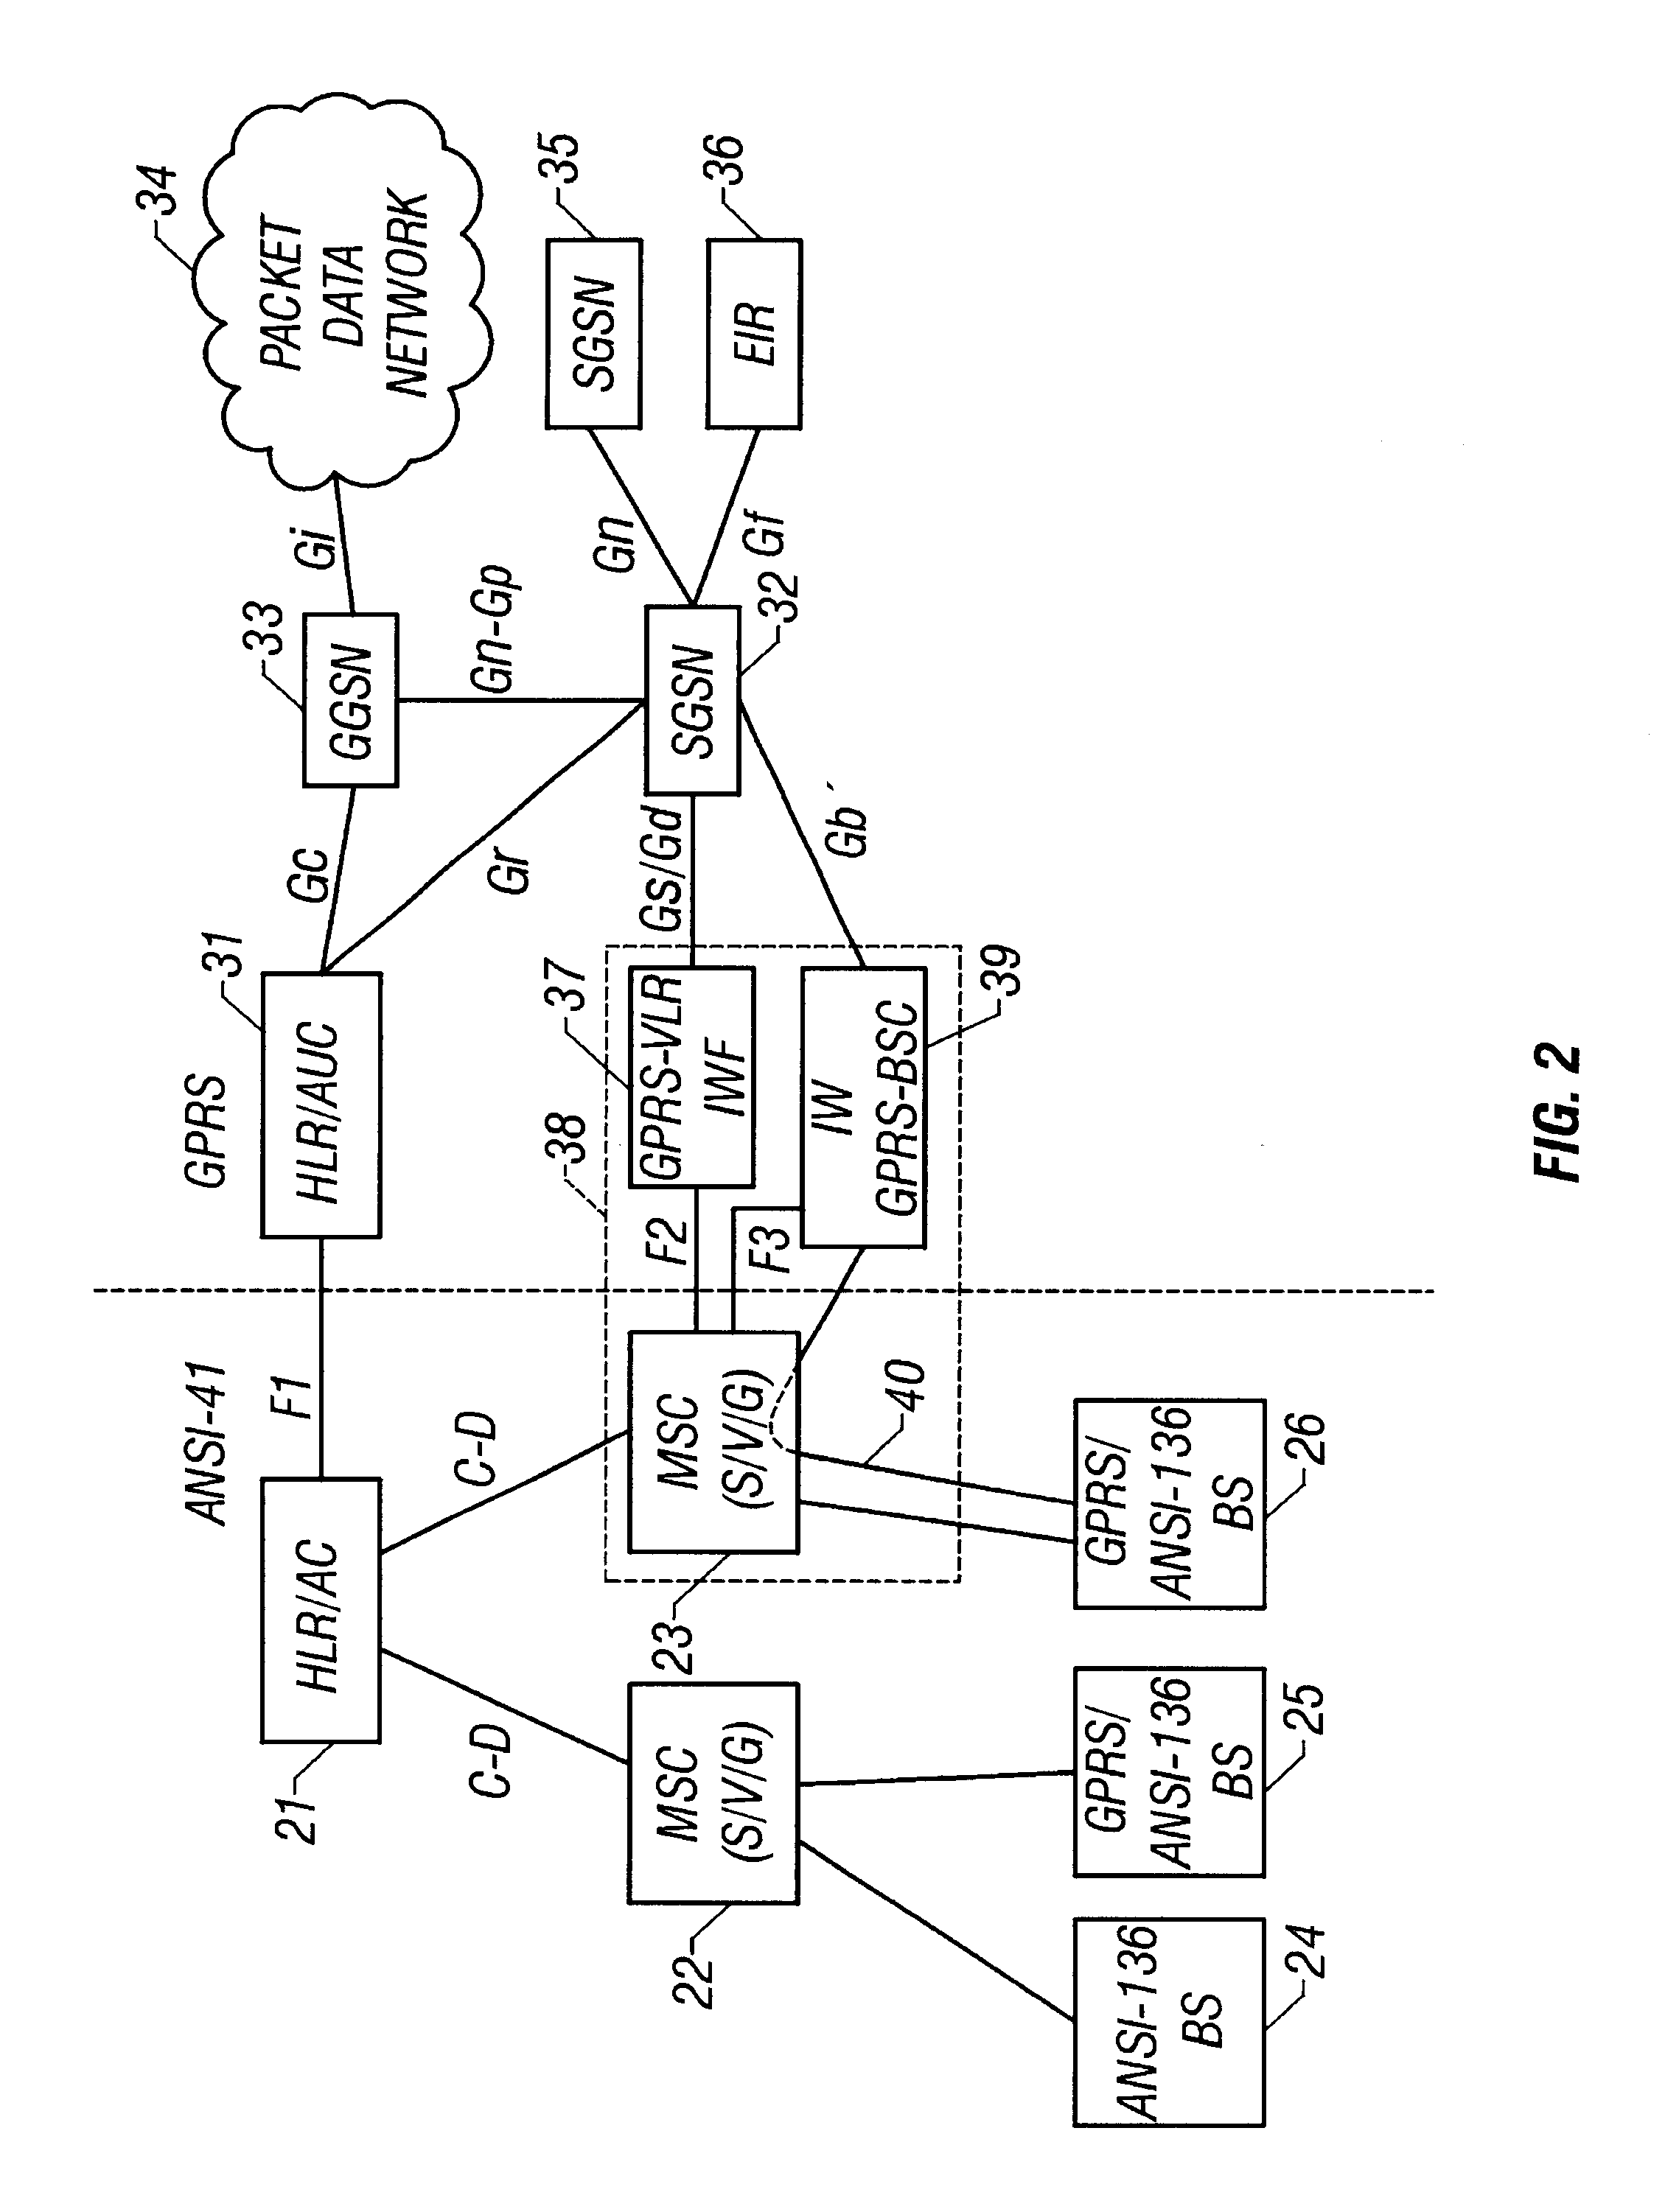 Integrated radio telecommunications network and method of interworking an ANSI-41 network and the general packet radio service (GPRS)